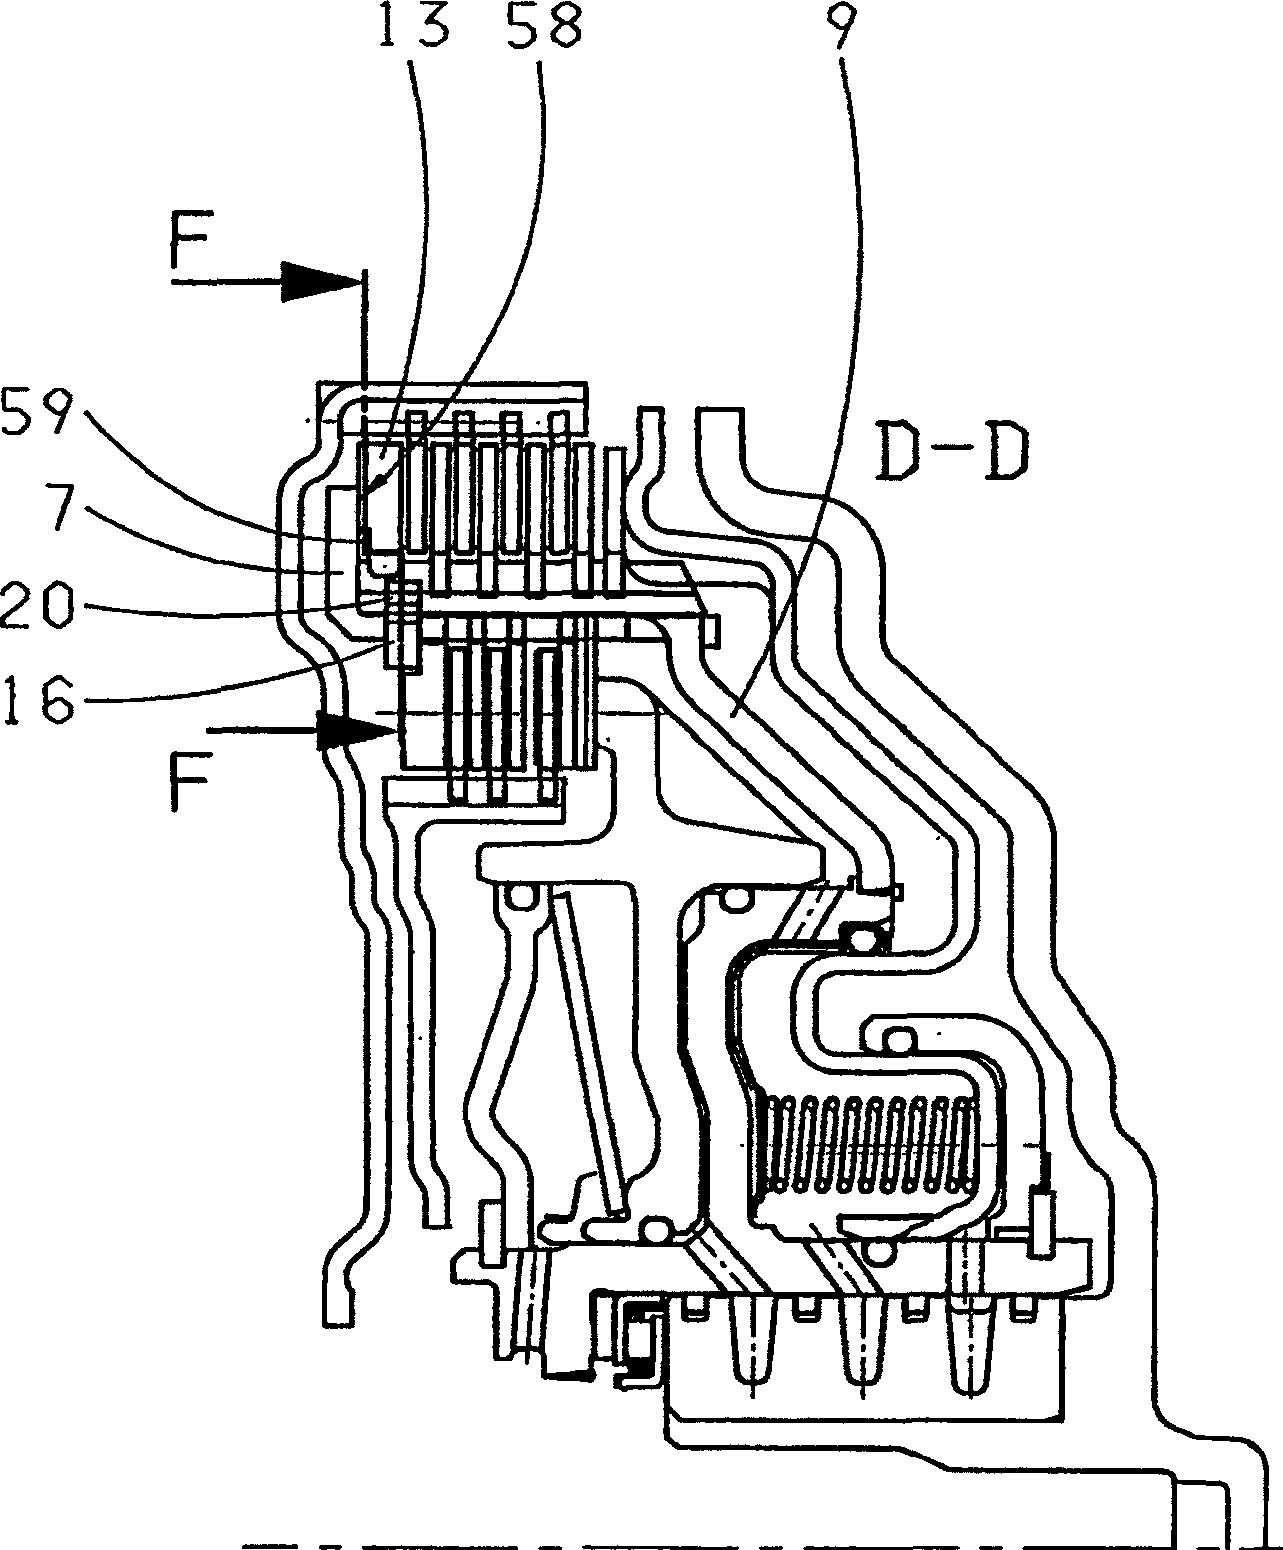 Clutch assembly in a gearbox comprising two axially and radially adjoining clutches